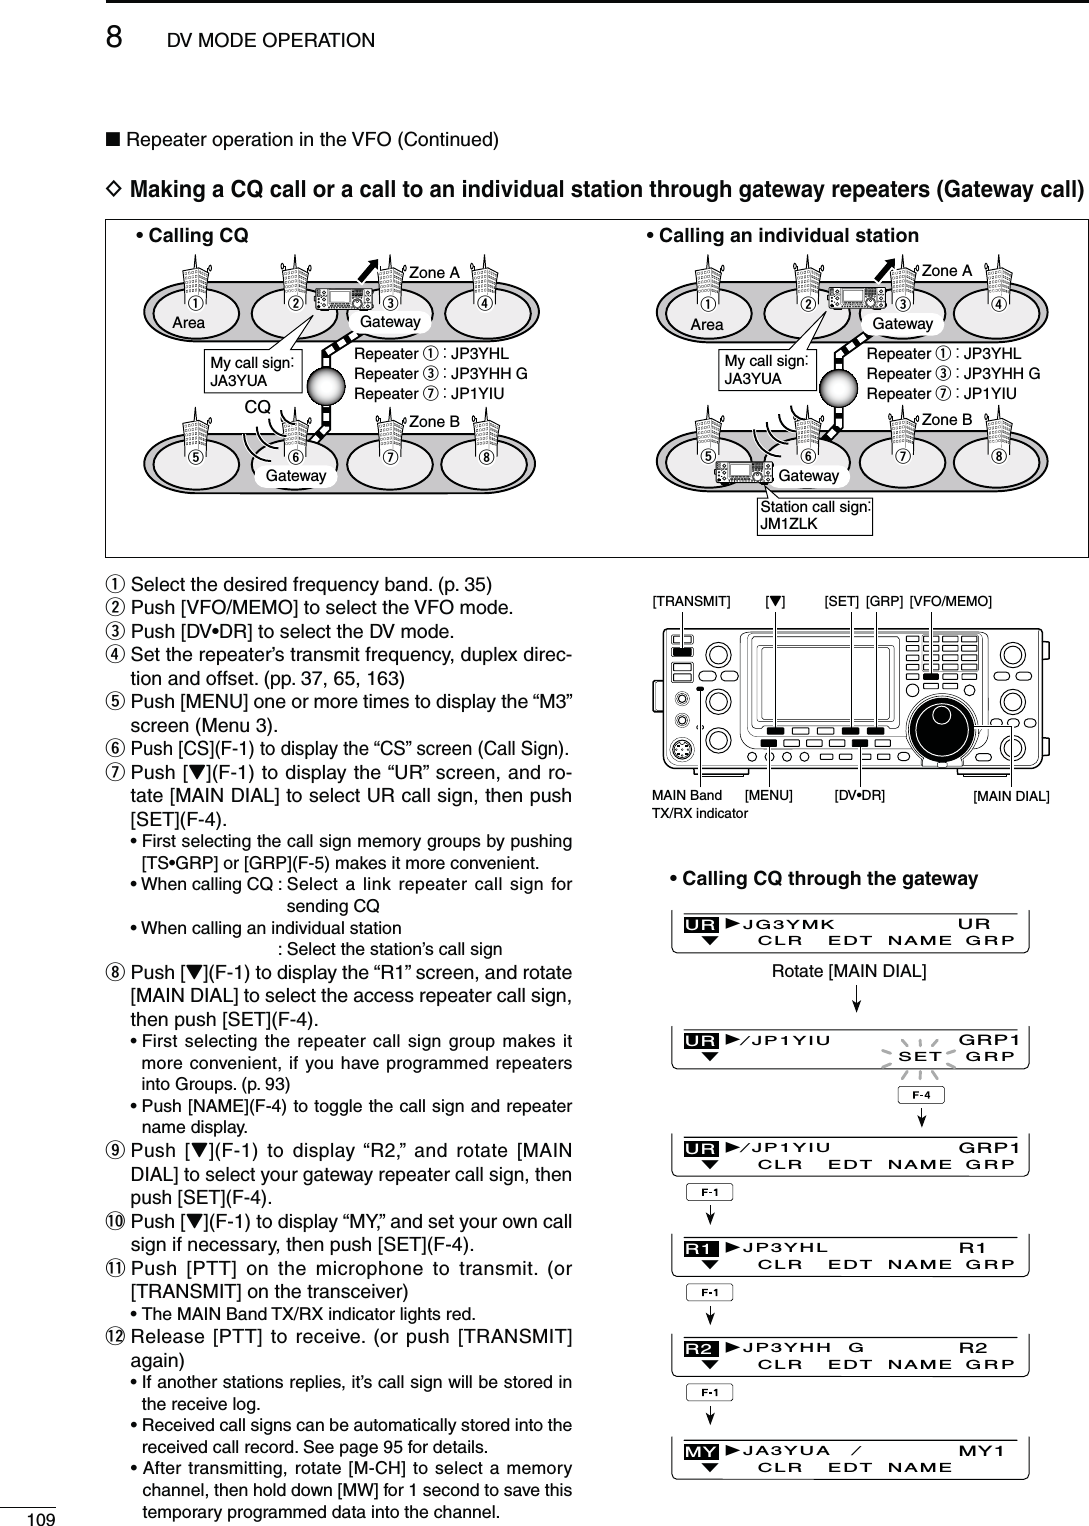 1098DV MODE OPERATIONq Select the desired frequency band. (p. 35)w Push [VFO/MEMO] to select the VFO mode.e Push [DVsDR] to select the DV mode.r  Set the repeater’s transmit frequency, duplex direc-tion and offset. (pp. 37, 65, 163)t  Push [MENU] one or more times to display the “M3” screen (Menu 3).y  Push [CS](F-1) to display the “CS” screen (Call Sign).u  Push [Z](F-1) to display the “UR” screen, and ro-tate [MAIN DIAL] to select UR call sign, then push [SET](F-4). s&amp;IRSTSELECTINGTHEcall sign memory groups by pushing ;43s&apos;20=OR;&apos;20=&amp;MAKESITMORECONVENIENT s When calling CQ :  Select a link repeater call sign for sending CQ s When calling an individual station      : Select the station’s call signi  Push [Z](F-1) to display the “R1” screen, and rotate [MAIN DIAL] to select the access repeater call sign, then push [SET](F-4). s&amp;IRSTSELECTINGTHE REPEATERCALLSIGN GROUPMAKESITmore convenient, if you have programmed repeaters into Groups. (p. 93) s0USH;.!-%=&amp;TOTOGGLETHECALLSIGNANDREPEATERname display.o  Push [Z](F-1) to display “R2,” and rotate [MAIN DIAL] to select your gateway repeater call sign, then push [SET](F-4).!0  Push [Z](F-1) TODISPLAYh-9vANDSETYOUROWNCALLsign if necessary, then push [SET](F-4).!1  Push [PTT] on the microphone to transmit. (or [TRANSMIT] on the transceiver) s4HE-!).&quot;AND4828INDICATORLIGHTSRED!2  Release [PTT] to receive. (or push [TRANSMIT] again) s)FANOTHERSTATIONSREPLIESITSCALLSIGNWILLBESTOREDINthe receive log. s2ECEIVEDCALLSIGNSCANBEAUTOMATICALLYSTOREDINTOTHEreceived call record. See page 95 for details.s!FTERTRANSMITTINGROTATE;-#(=TOSELECTAMEMORYchannel, then hold down [MW] for 1 second to save this temporary programmed data into the channel.[TRANSMIT]MAIN BandTX/RX indicator[MAIN DIAL][D[MENU][VFO/MEMO][SET][Z] [GRP]UR    URCLRJG3YMKEDT NAME GRPR1    R1CLRJP3YHLEDT NAME GRPUR    GRP1⁄ JP1YIUSET GRPRotate [MAIN DIAL]R2    R2CLRJP3YHH GEDT NAME GRPMY    MY1CLRJA3YUA   ⁄EDT NAMEUR    GRP1CLR⁄ JP1YIUEDT NAME GRPs#ALLING#1 THROUGHTHEGATEWAYs#ALLING#1Repeater q ： JP3YHLRepeater e ： JP3YHH GRepeater u ： JP1YIUCQq w e rt y u iMy call sign：JA3YUAGatewayGatewayAreaZone AZone Bs#ALLINGANINDIVIDUALSTATIONRepeater q ： JP3YHLRepeater e ： JP3YHH GRepeater u ： JP1YIUGatewayGatewayAreaZone AZone Bq w e rt y u iMy call sign：JA3YUAStation call sign： JM1ZLKN Repeater operation in the VFO (Continued)D-AKINGA#1CALLORACALLTOANINDIVIDUALSTATIONTHROUGHGATEWAYREPEATERS&apos;ATEWAYCALL